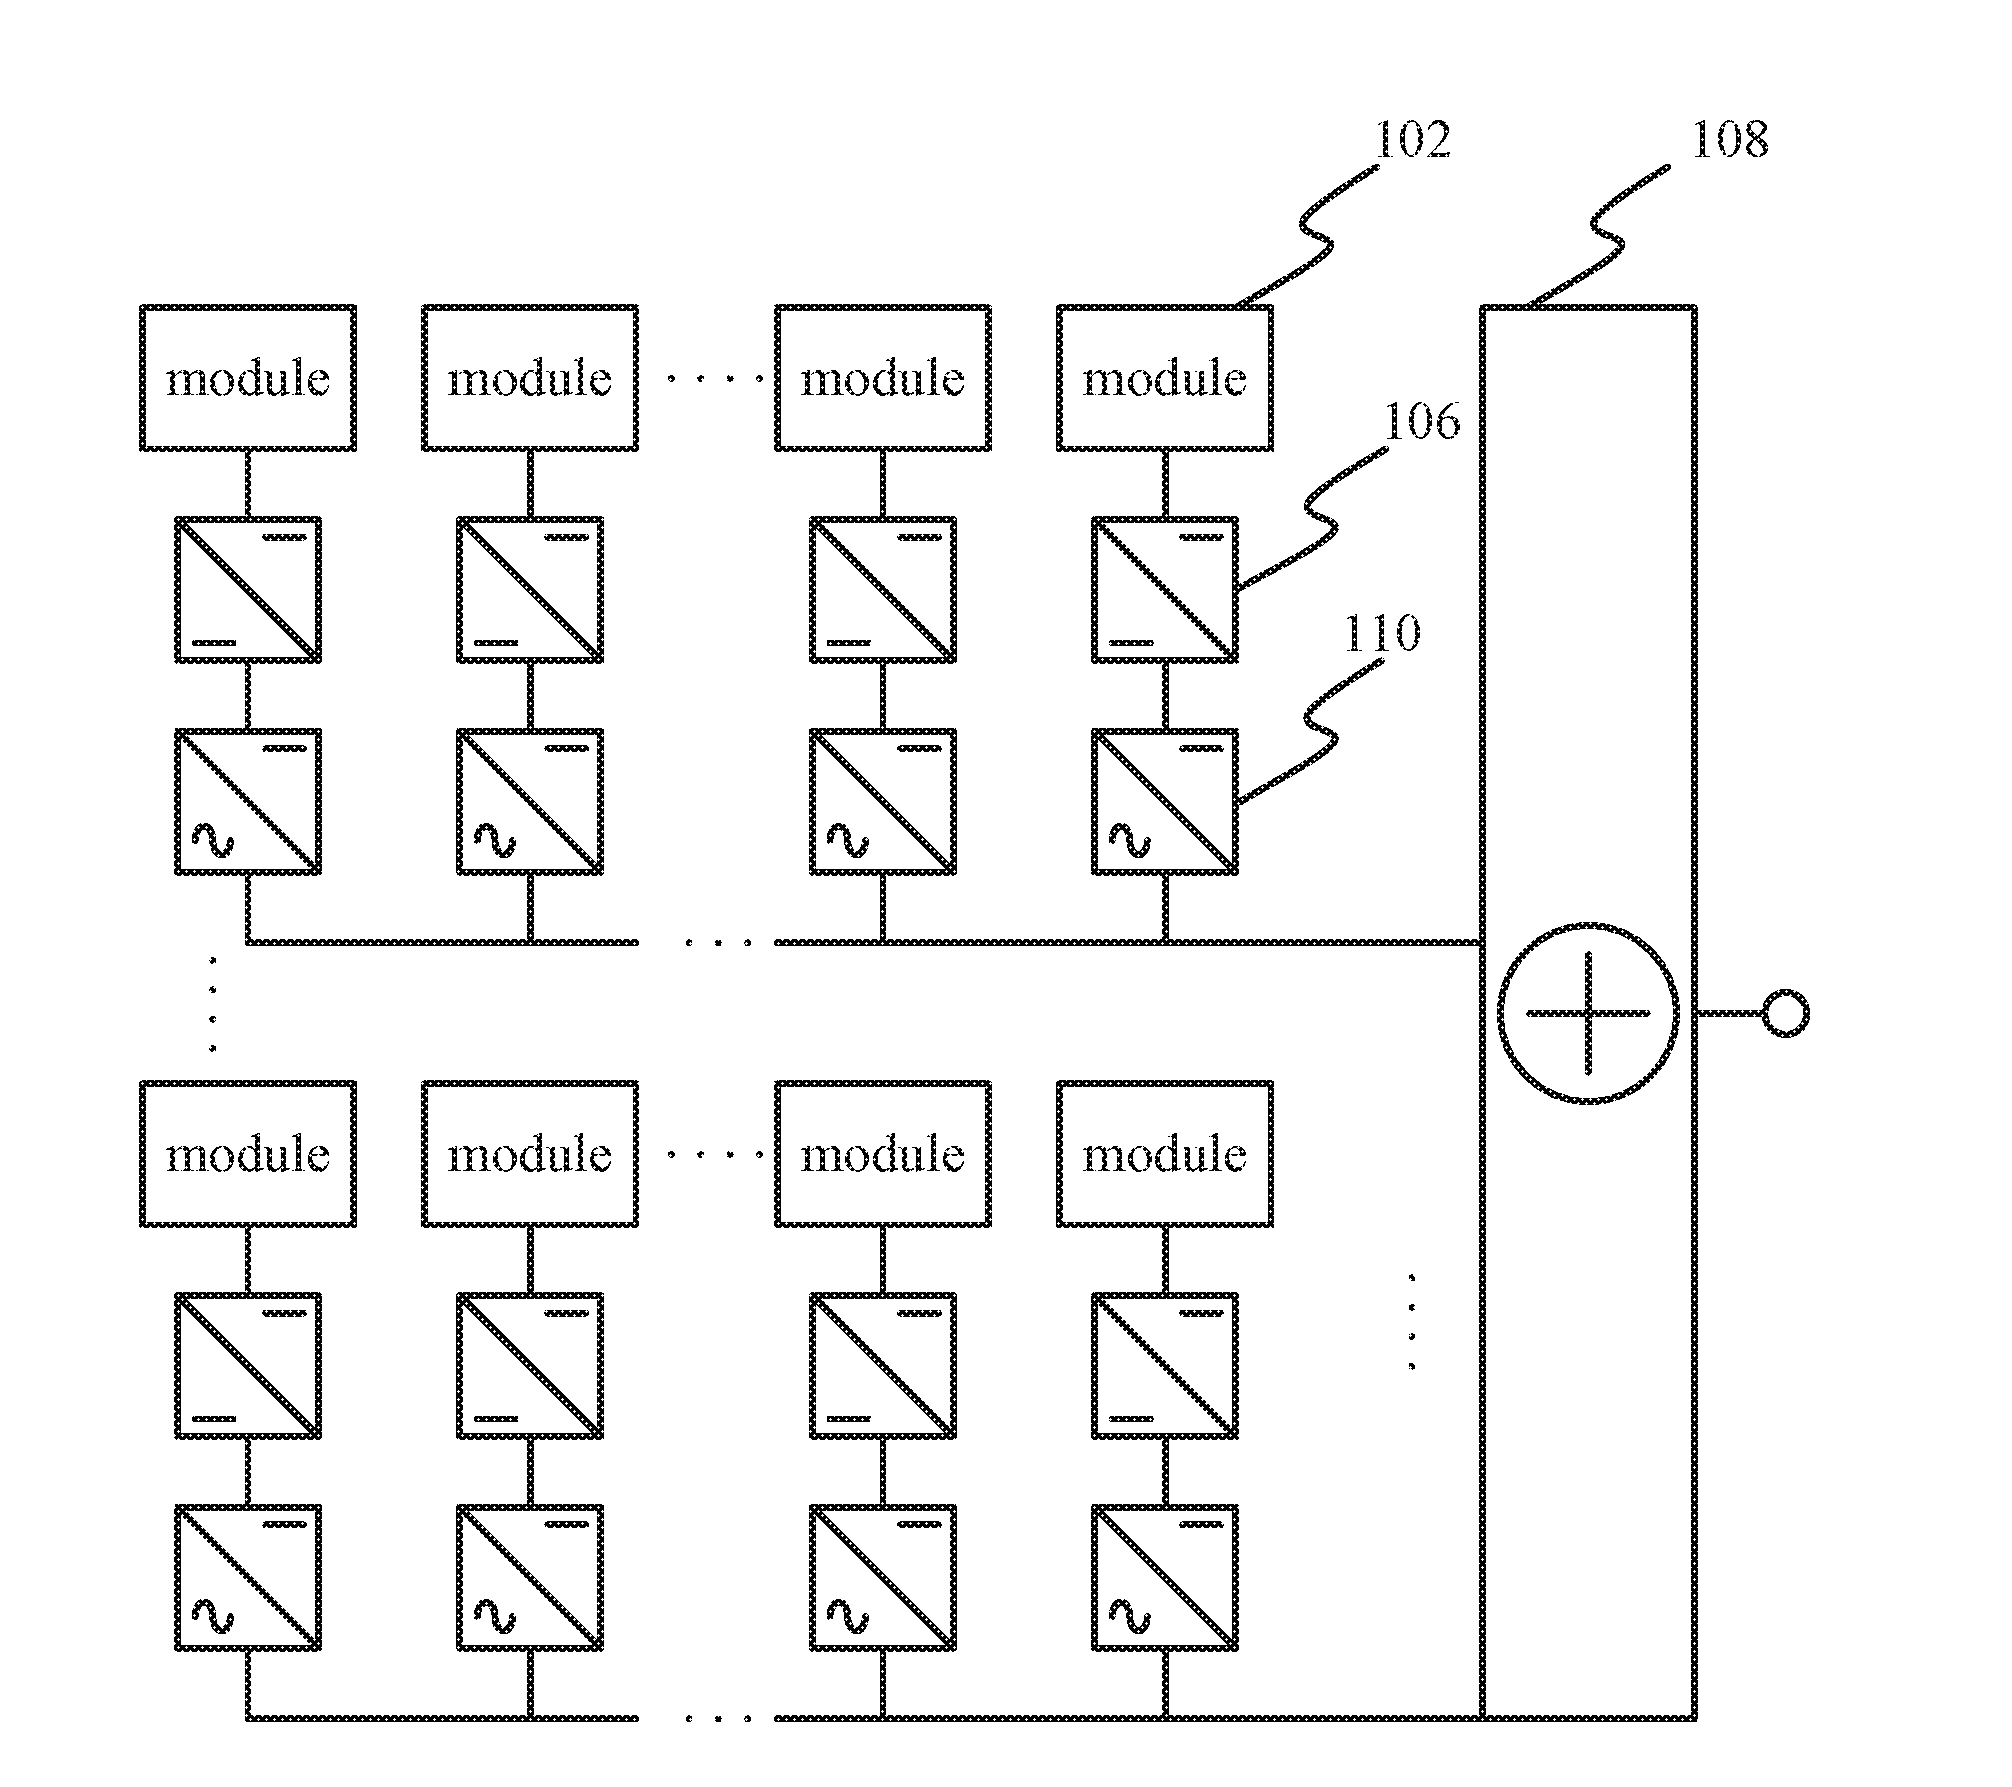 Systems and methods for quick dissipation of stored energy from input capacitors of power inverters